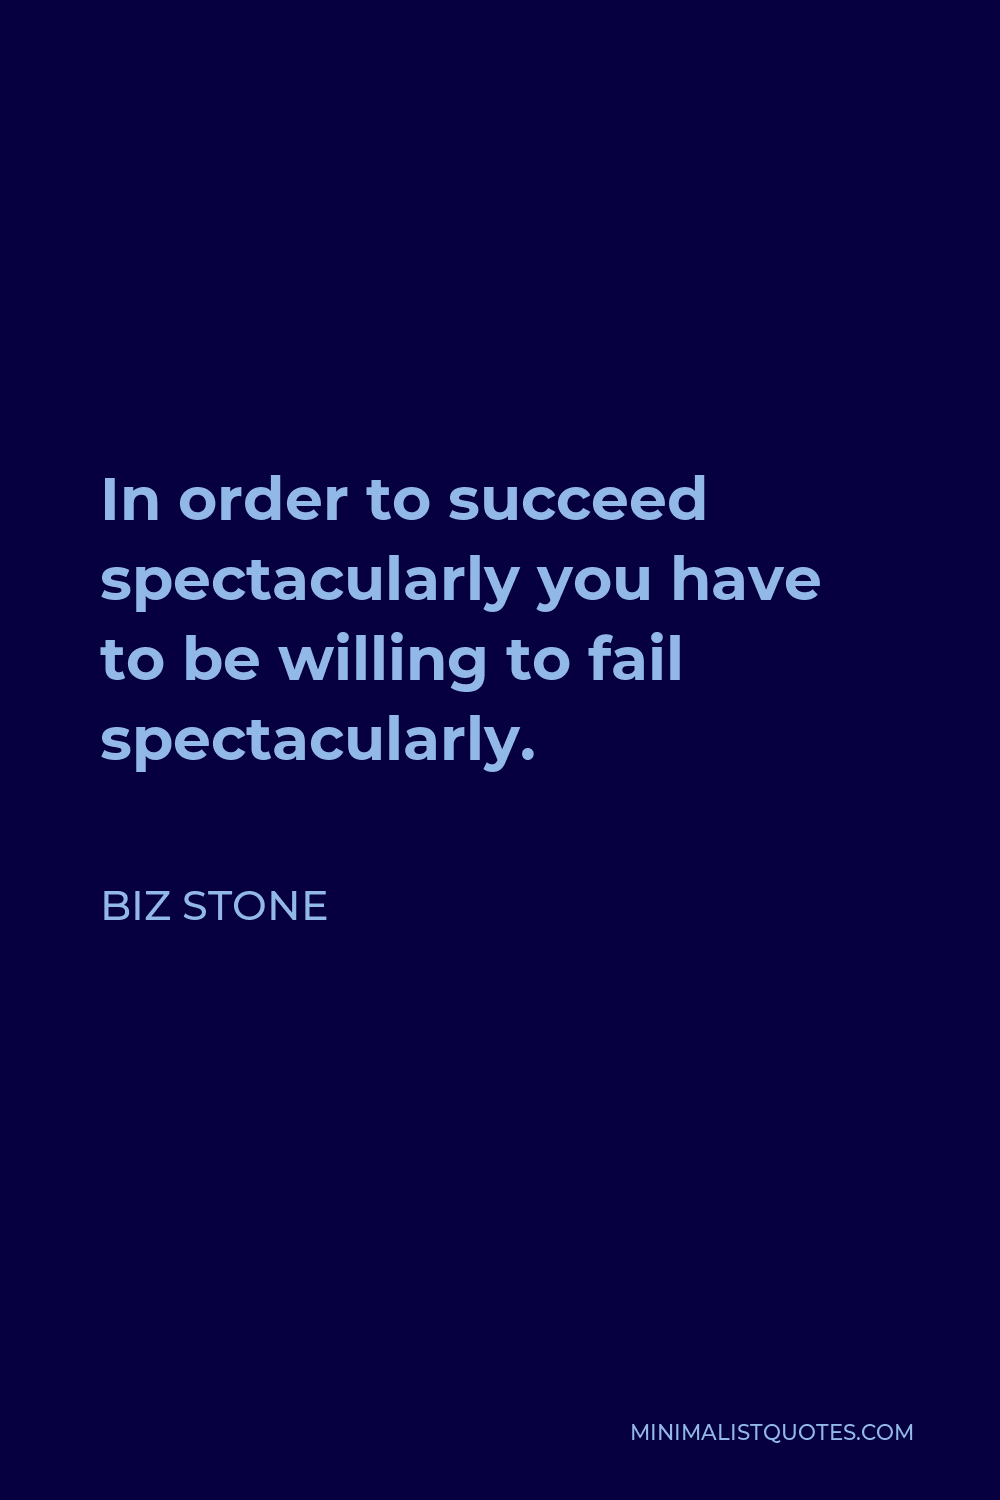 Biz Stone Quote - In order to succeed spectacularly you have to be willing to fail spectacularly.